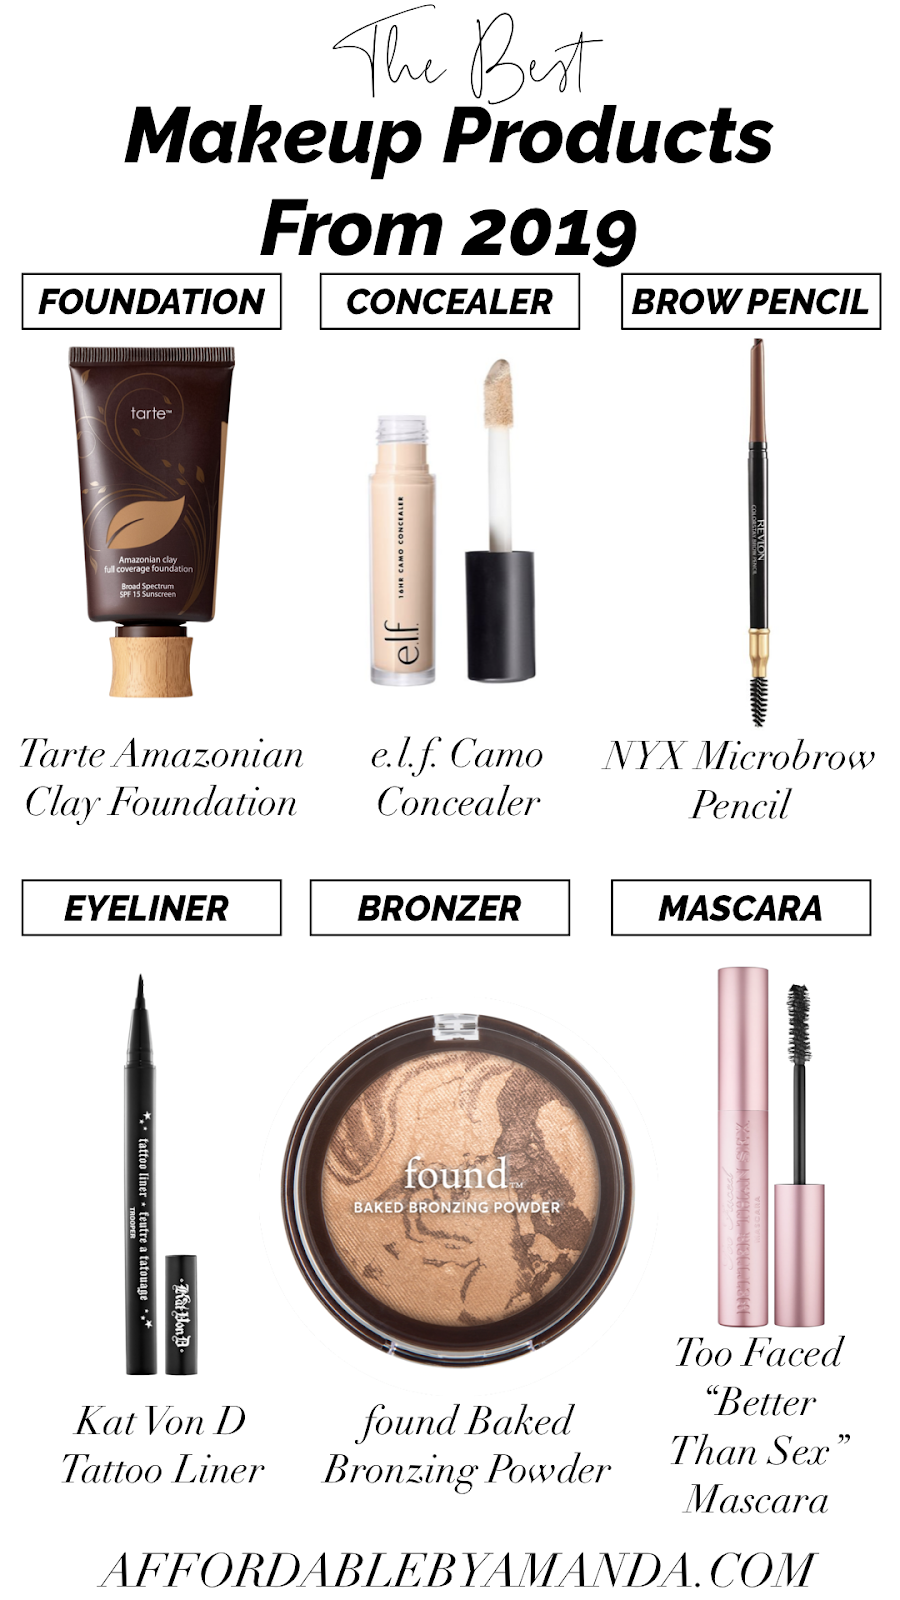 Beauty Blogger Amanda Burrows of Affordable by Amanda Shares Her Top Favorite Makeup Products From 2019. Including Tarte Cosmetics Full Coverage Foundation, elf Camo Concealer, NYX Microbrow Pencil, Too Faced Better than Sex Mascara, Kat Von D Tattoo Eyeliner and more! See the full post on www.affordablebyamanda.com. Don't Miss These Affordable Makeup Products From 2019.